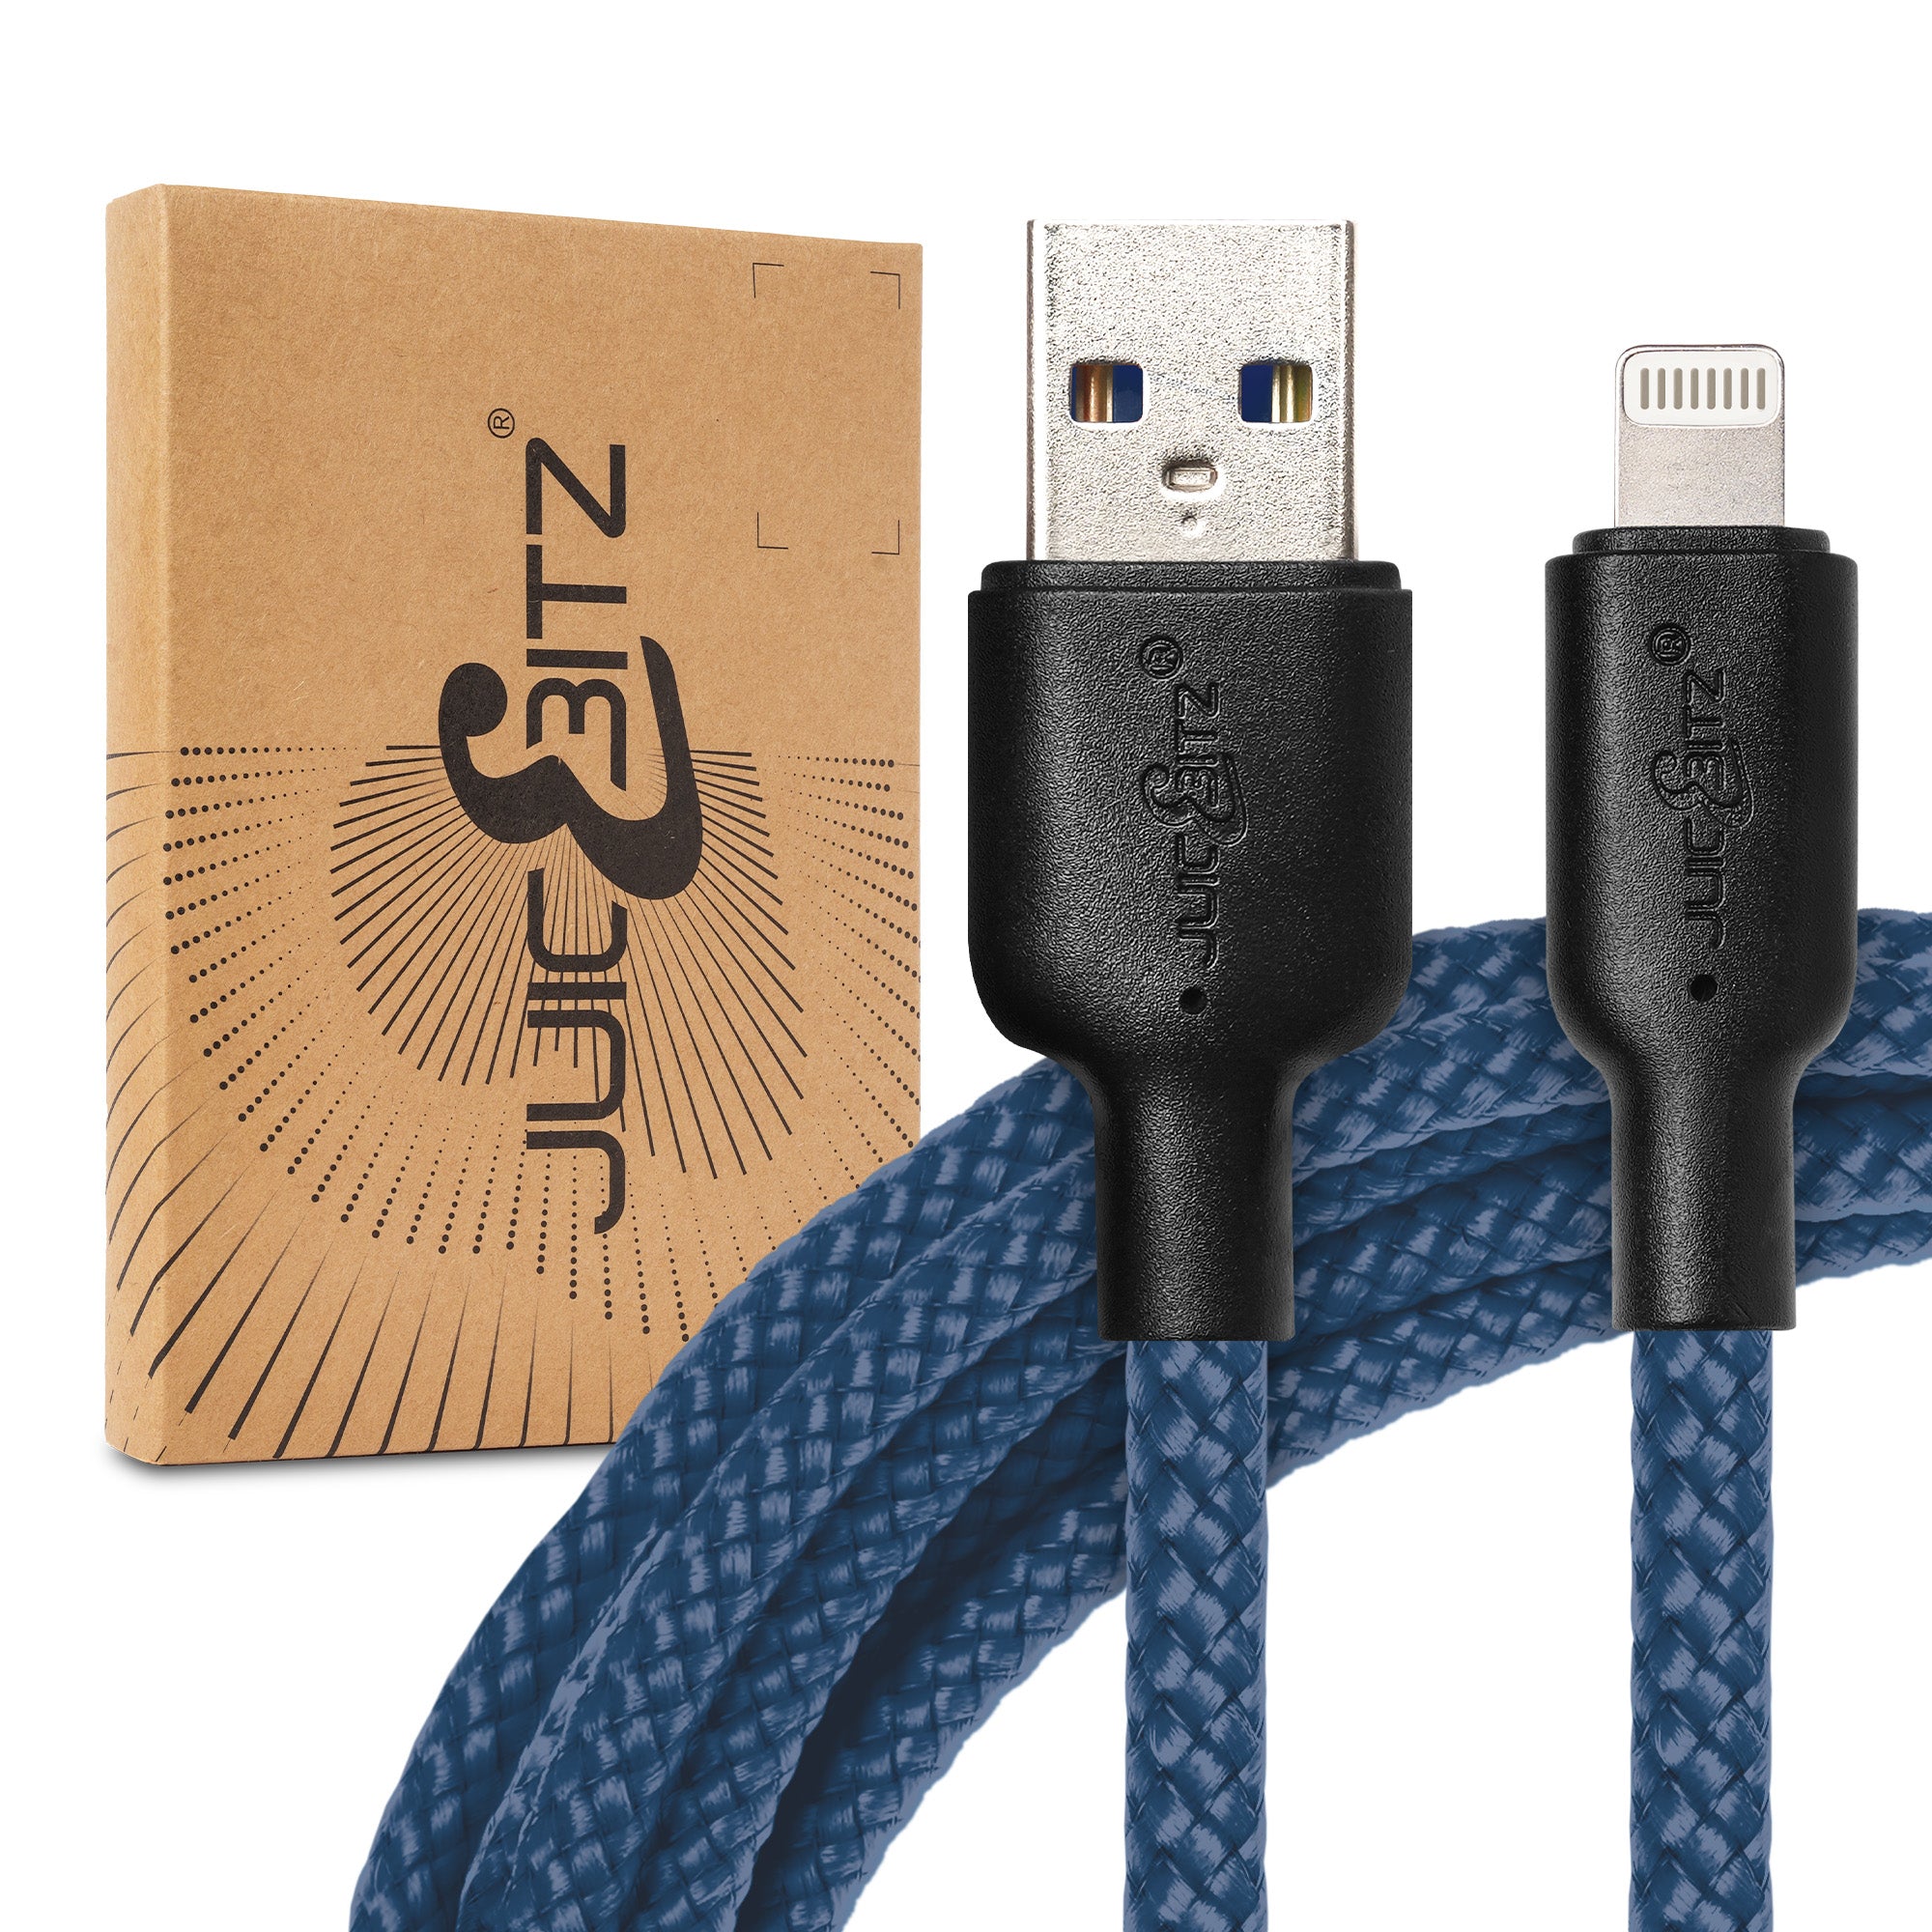 Braided Heavy Duty USB Charger Cable Data Sync Wire Lead for iPhone, iPad, iPod - Navy